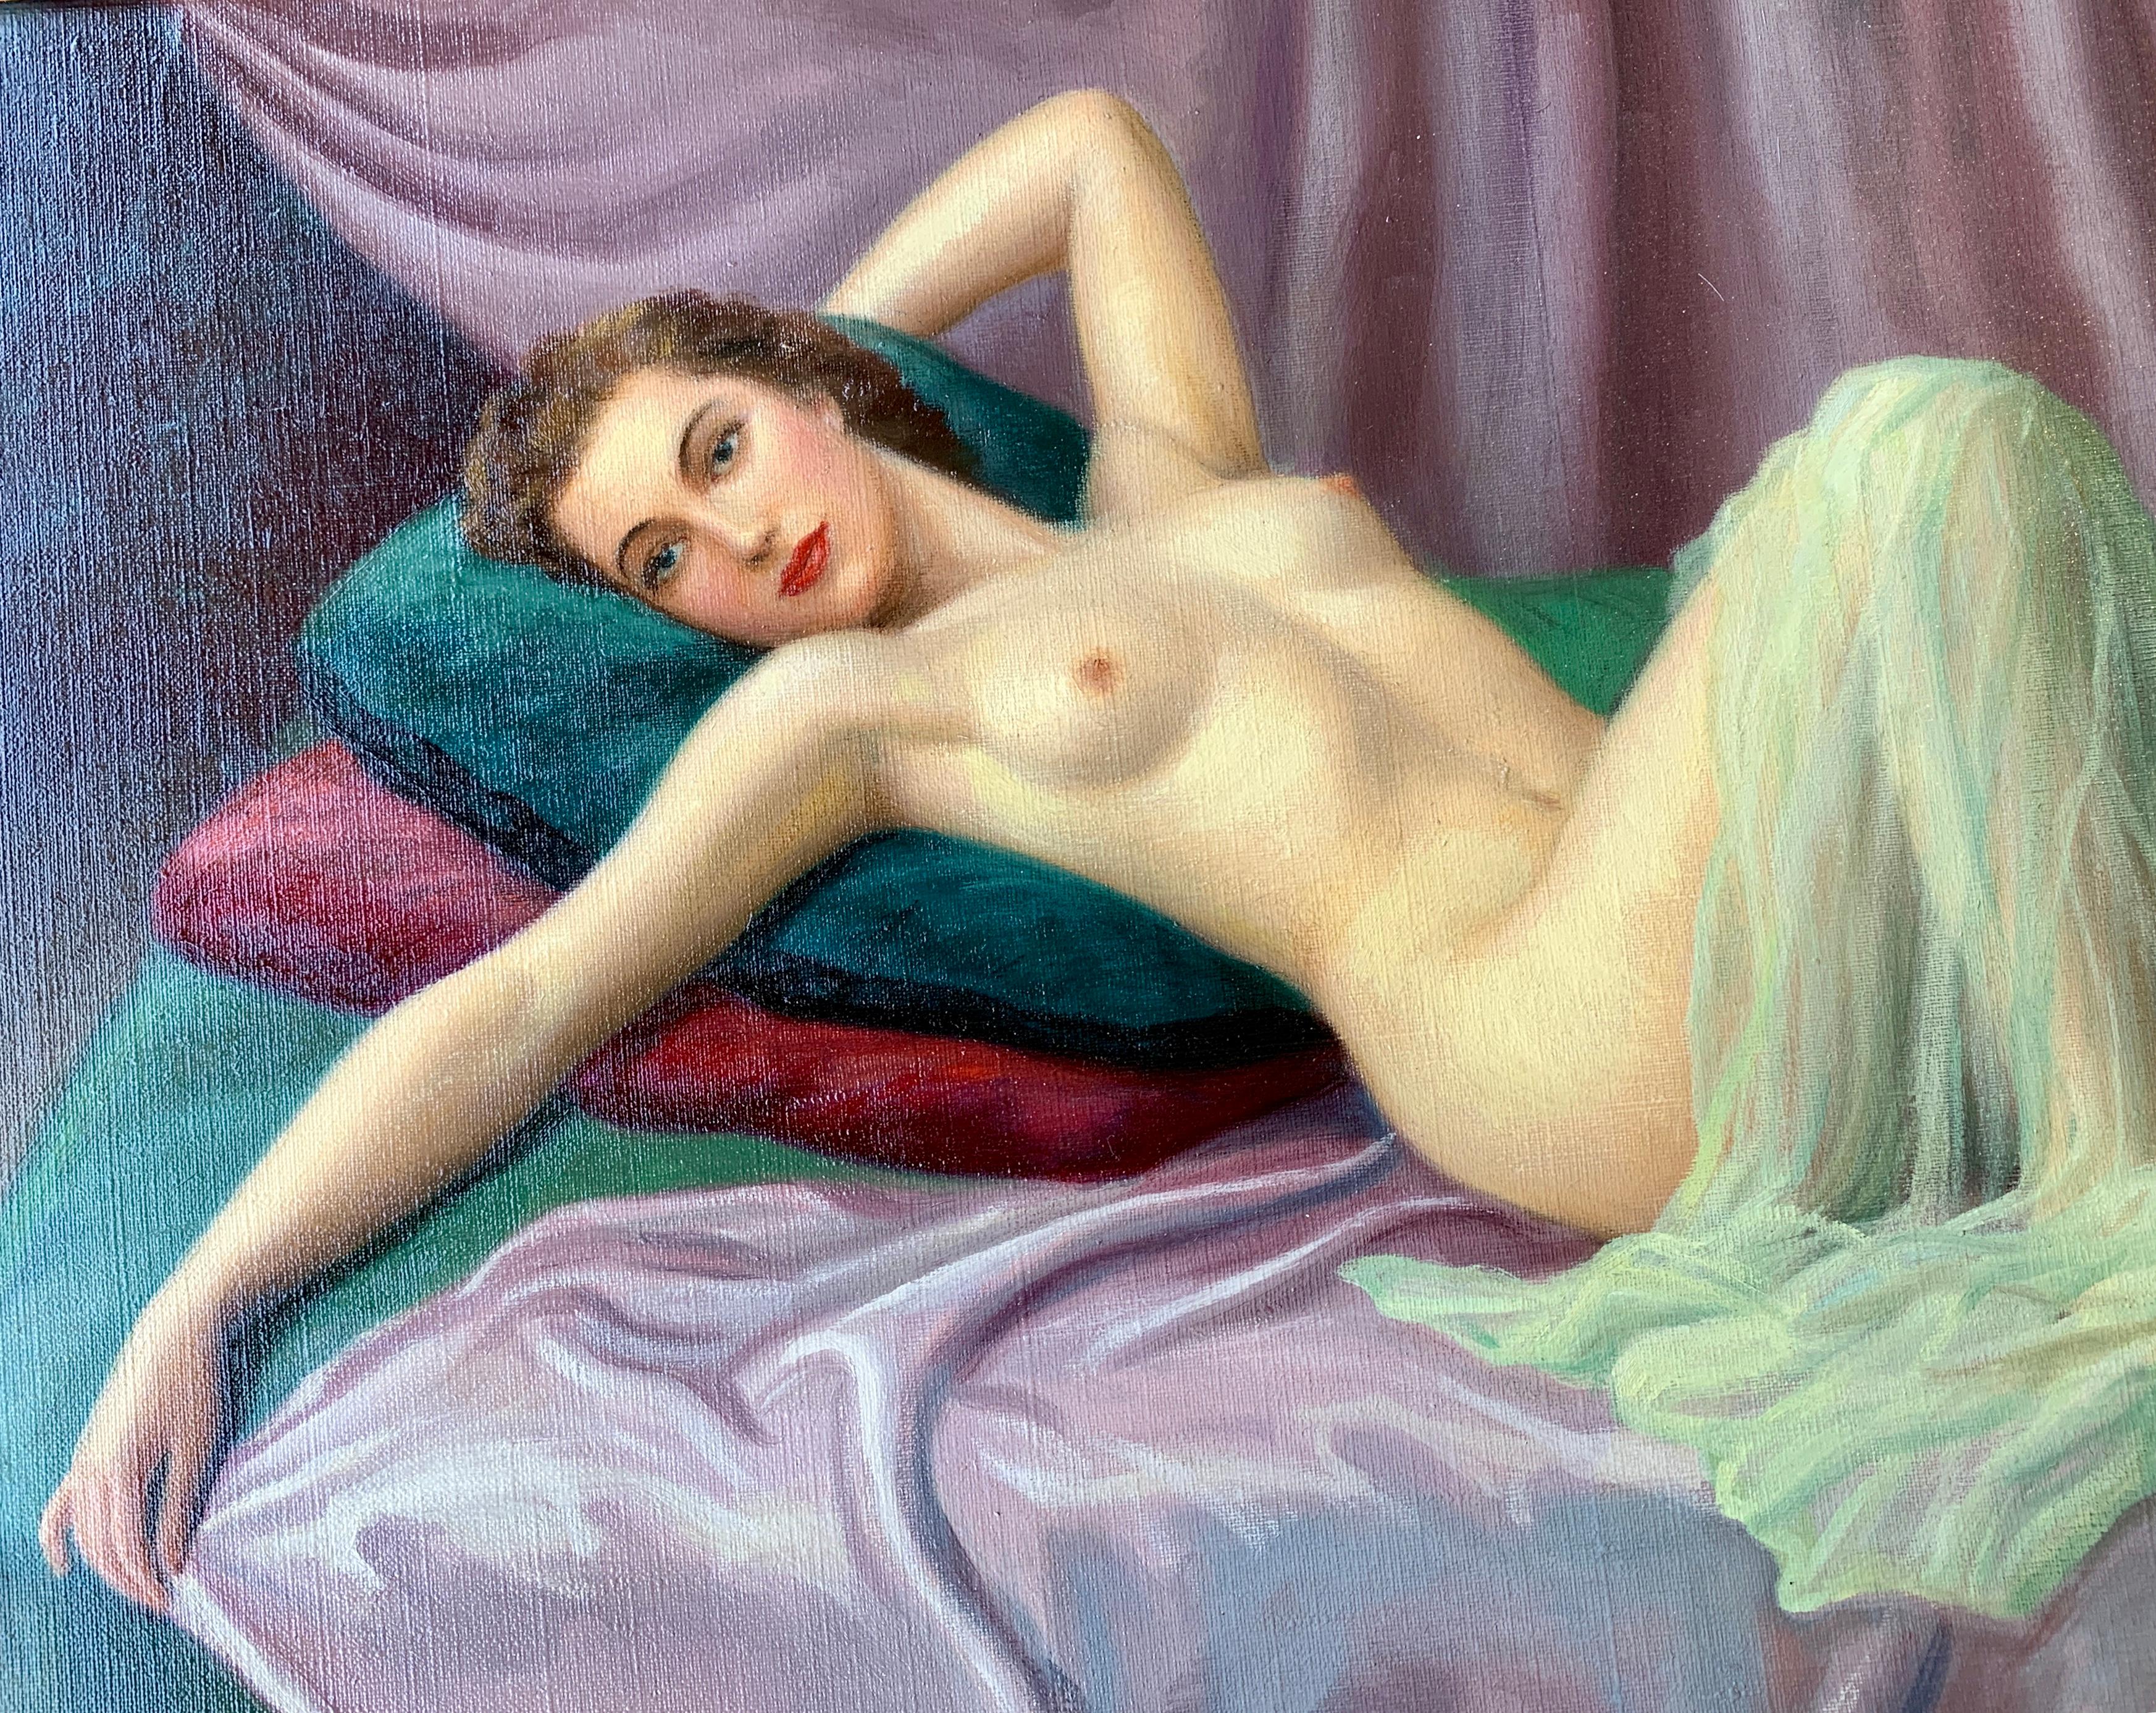 Exquisite and colorful original oil on canvas painting by 20th century French painter, Joan Mayor, from the 1940s, depicts a ravishing woman or pin-up girl with wavy brunette hair, sultry red lips and an expectant expression, lounging on a hunter